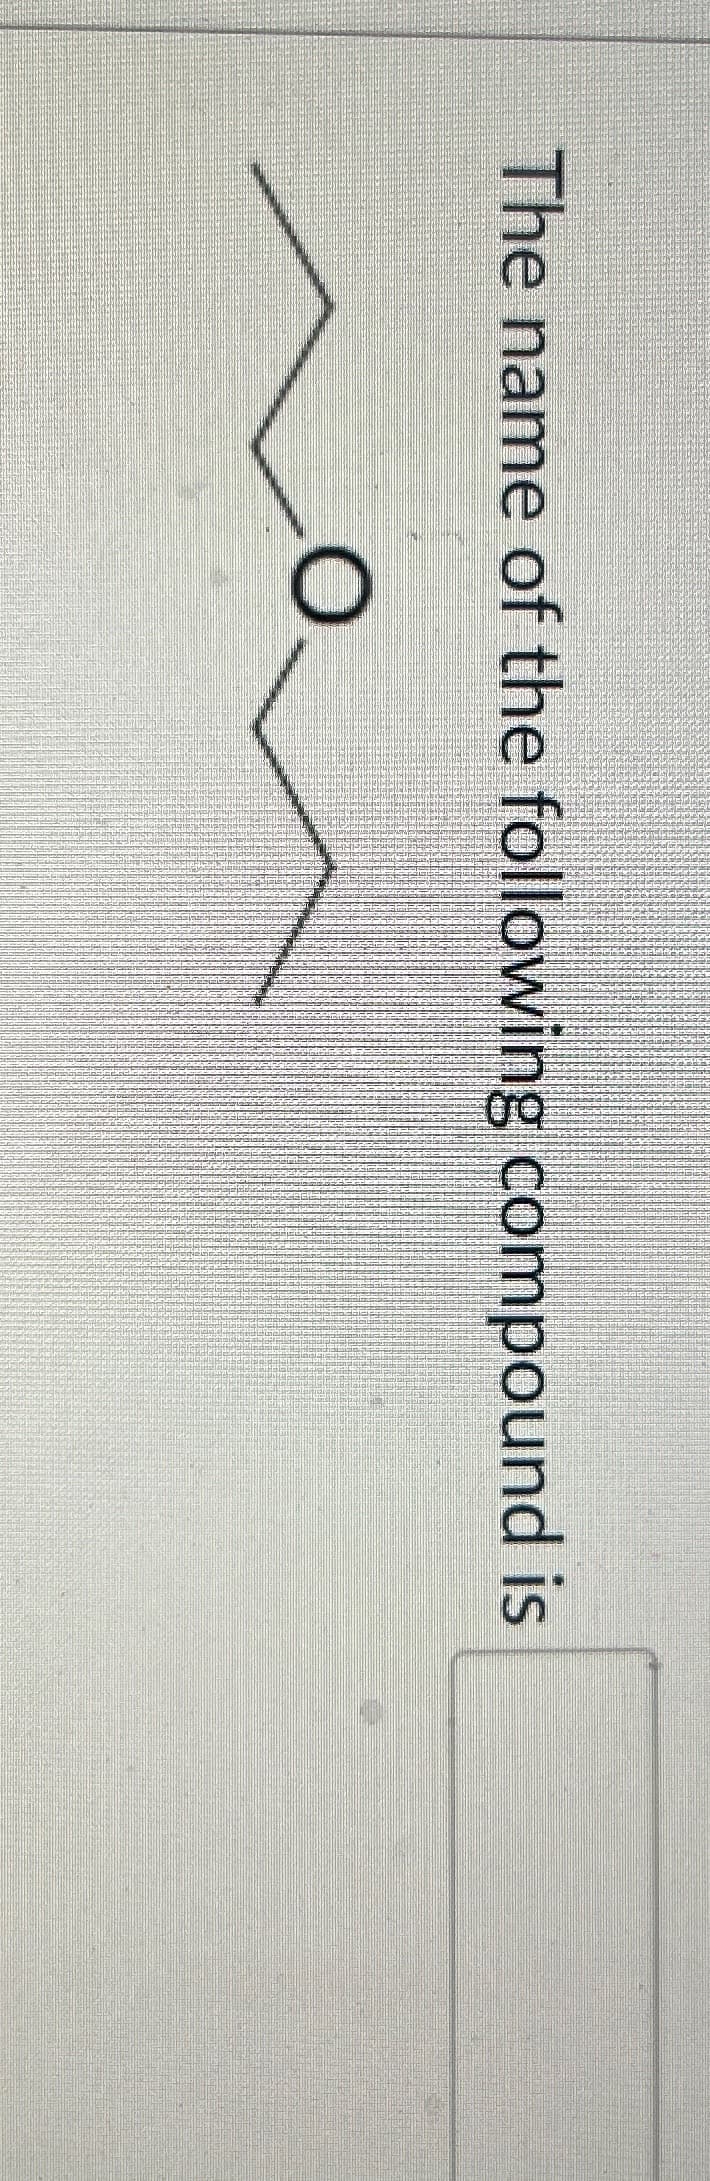 The name of the following compound is
O